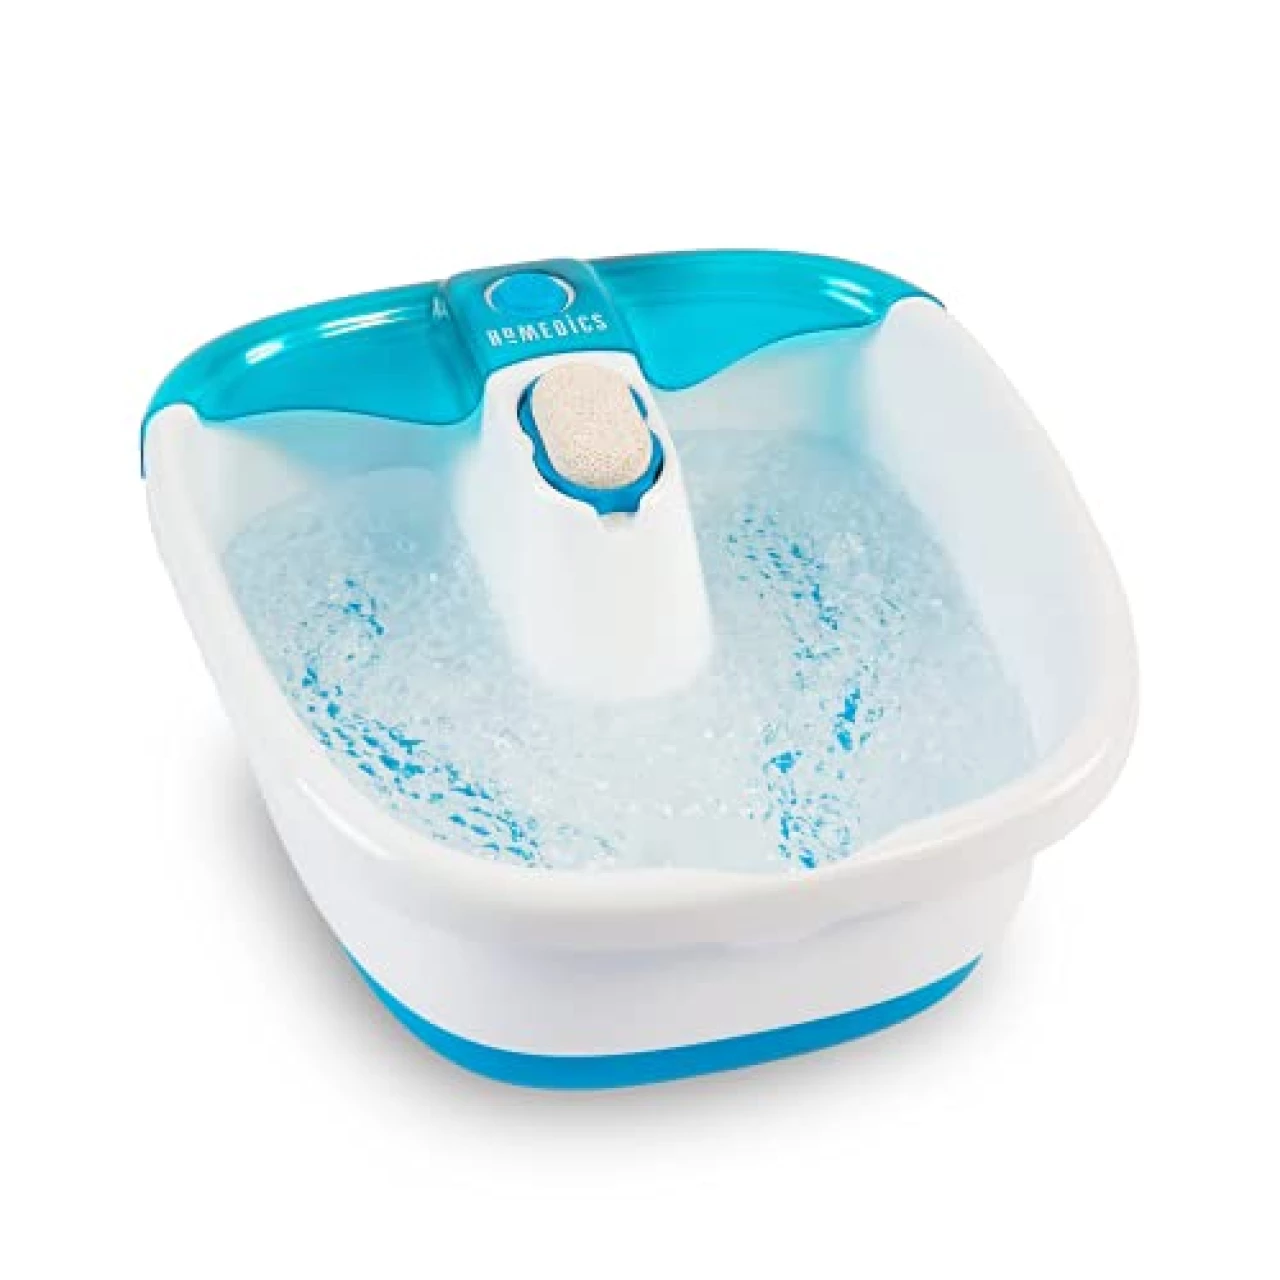 HoMedics Bubble Mate Foot Spa, Toe Touch Controlled Foot Bath